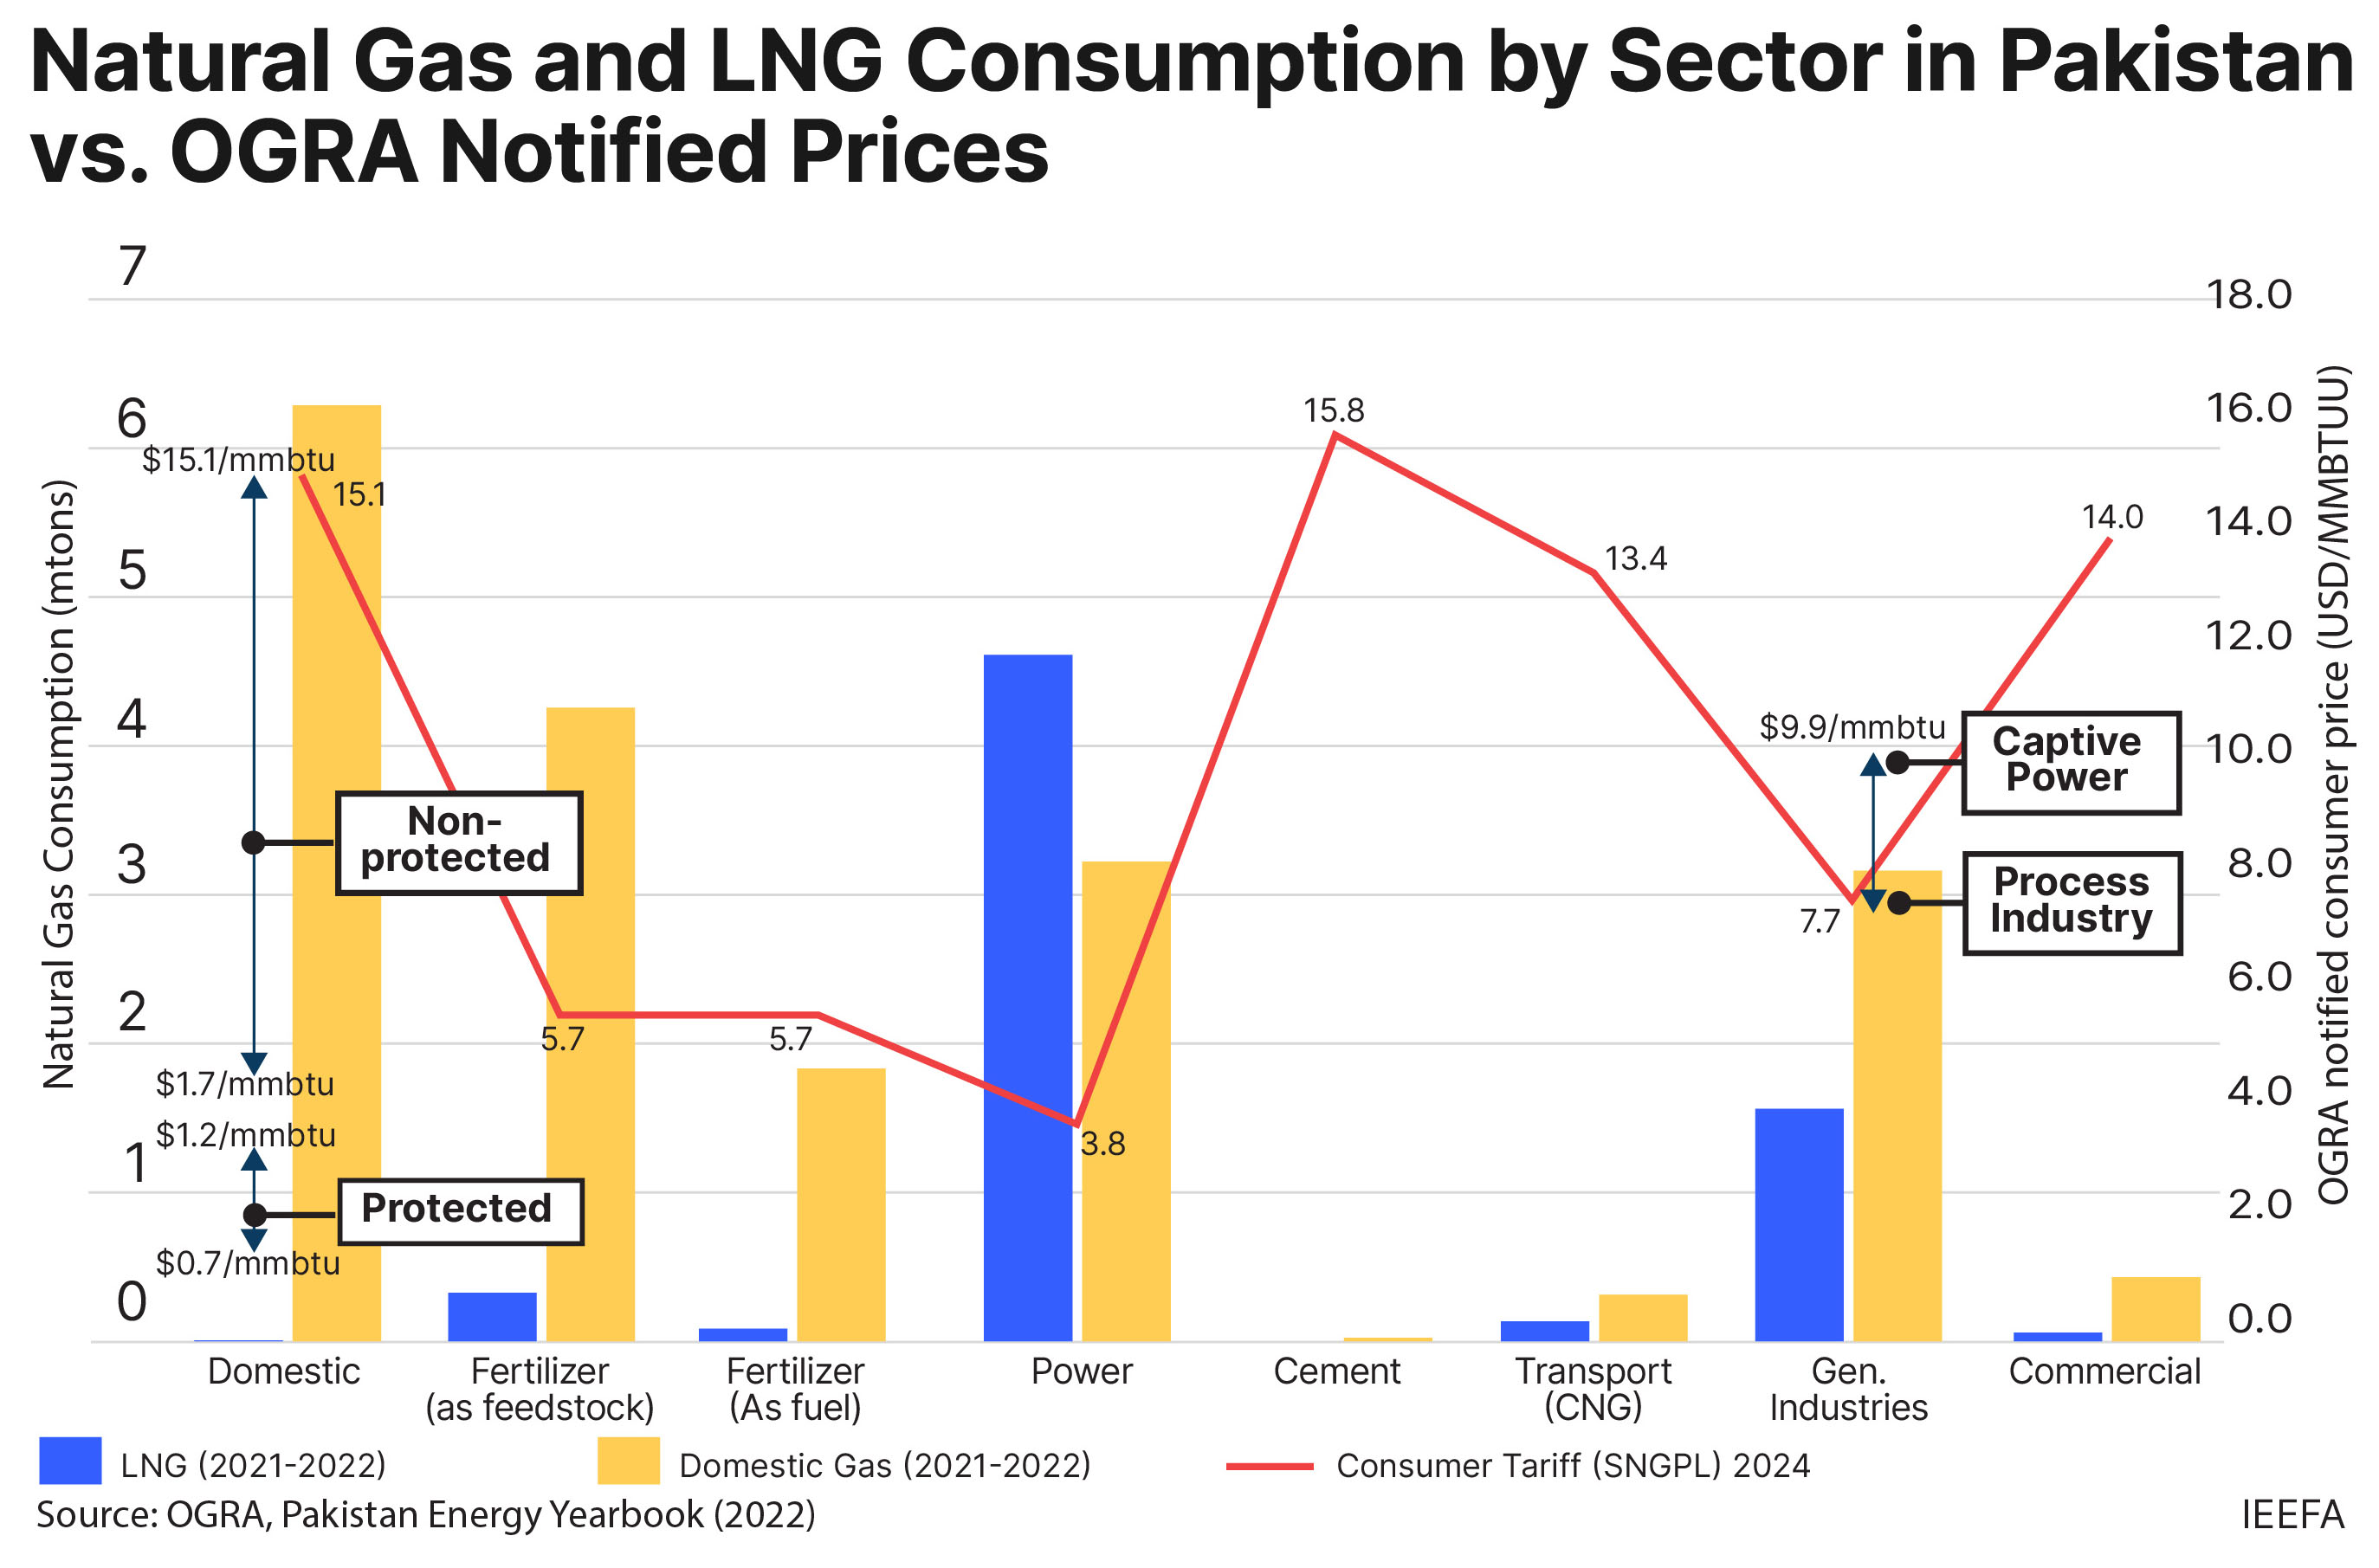 natural gas and LNG consumption by sector in Pakistan vs OGRA notified prices